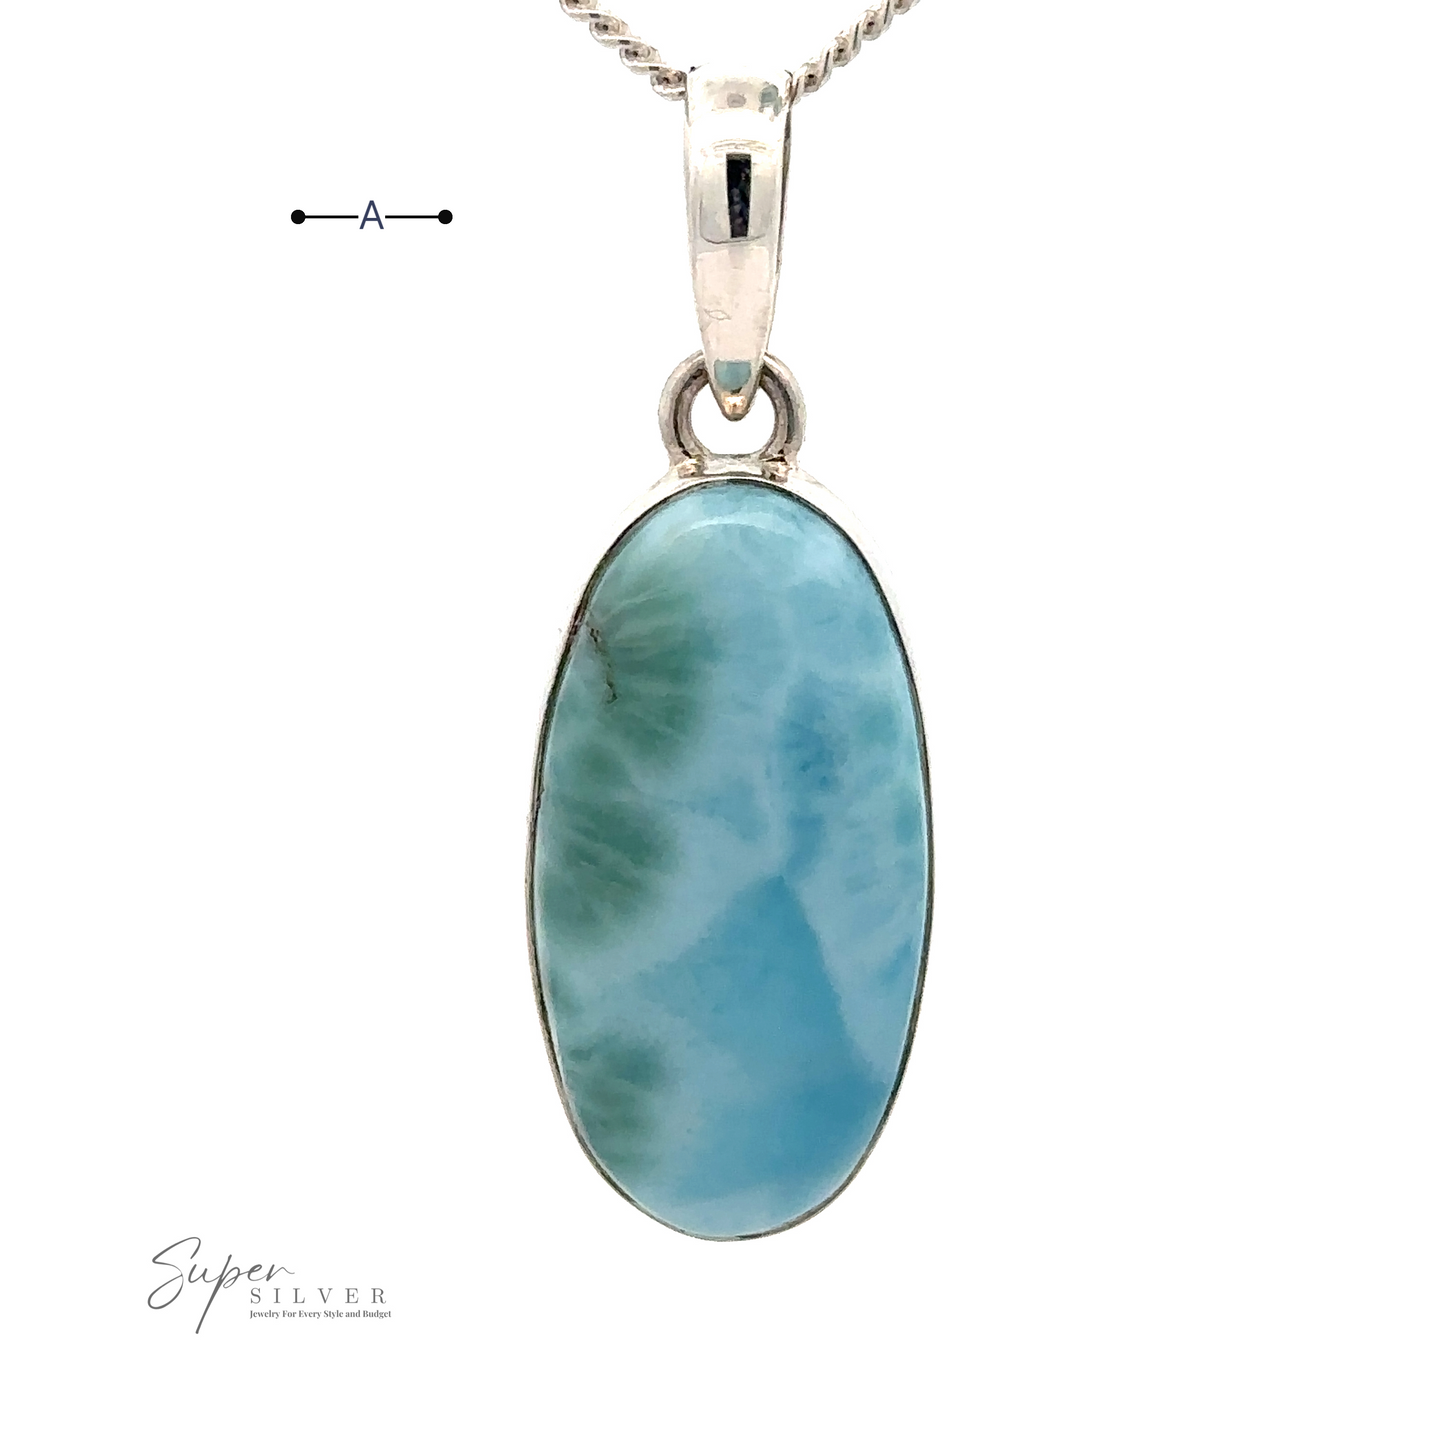 
                  
                    A Beautiful Long Oval Larimar Pendant with an oval-shaped blue-green Larimar gemstone, known for its origins in the Dominican Republic, is set in a .925 Sterling Silver frame. The pendant hangs on a silver chain against a plain white background. "Super Silver" is written in the bottom left corner.
                  
                